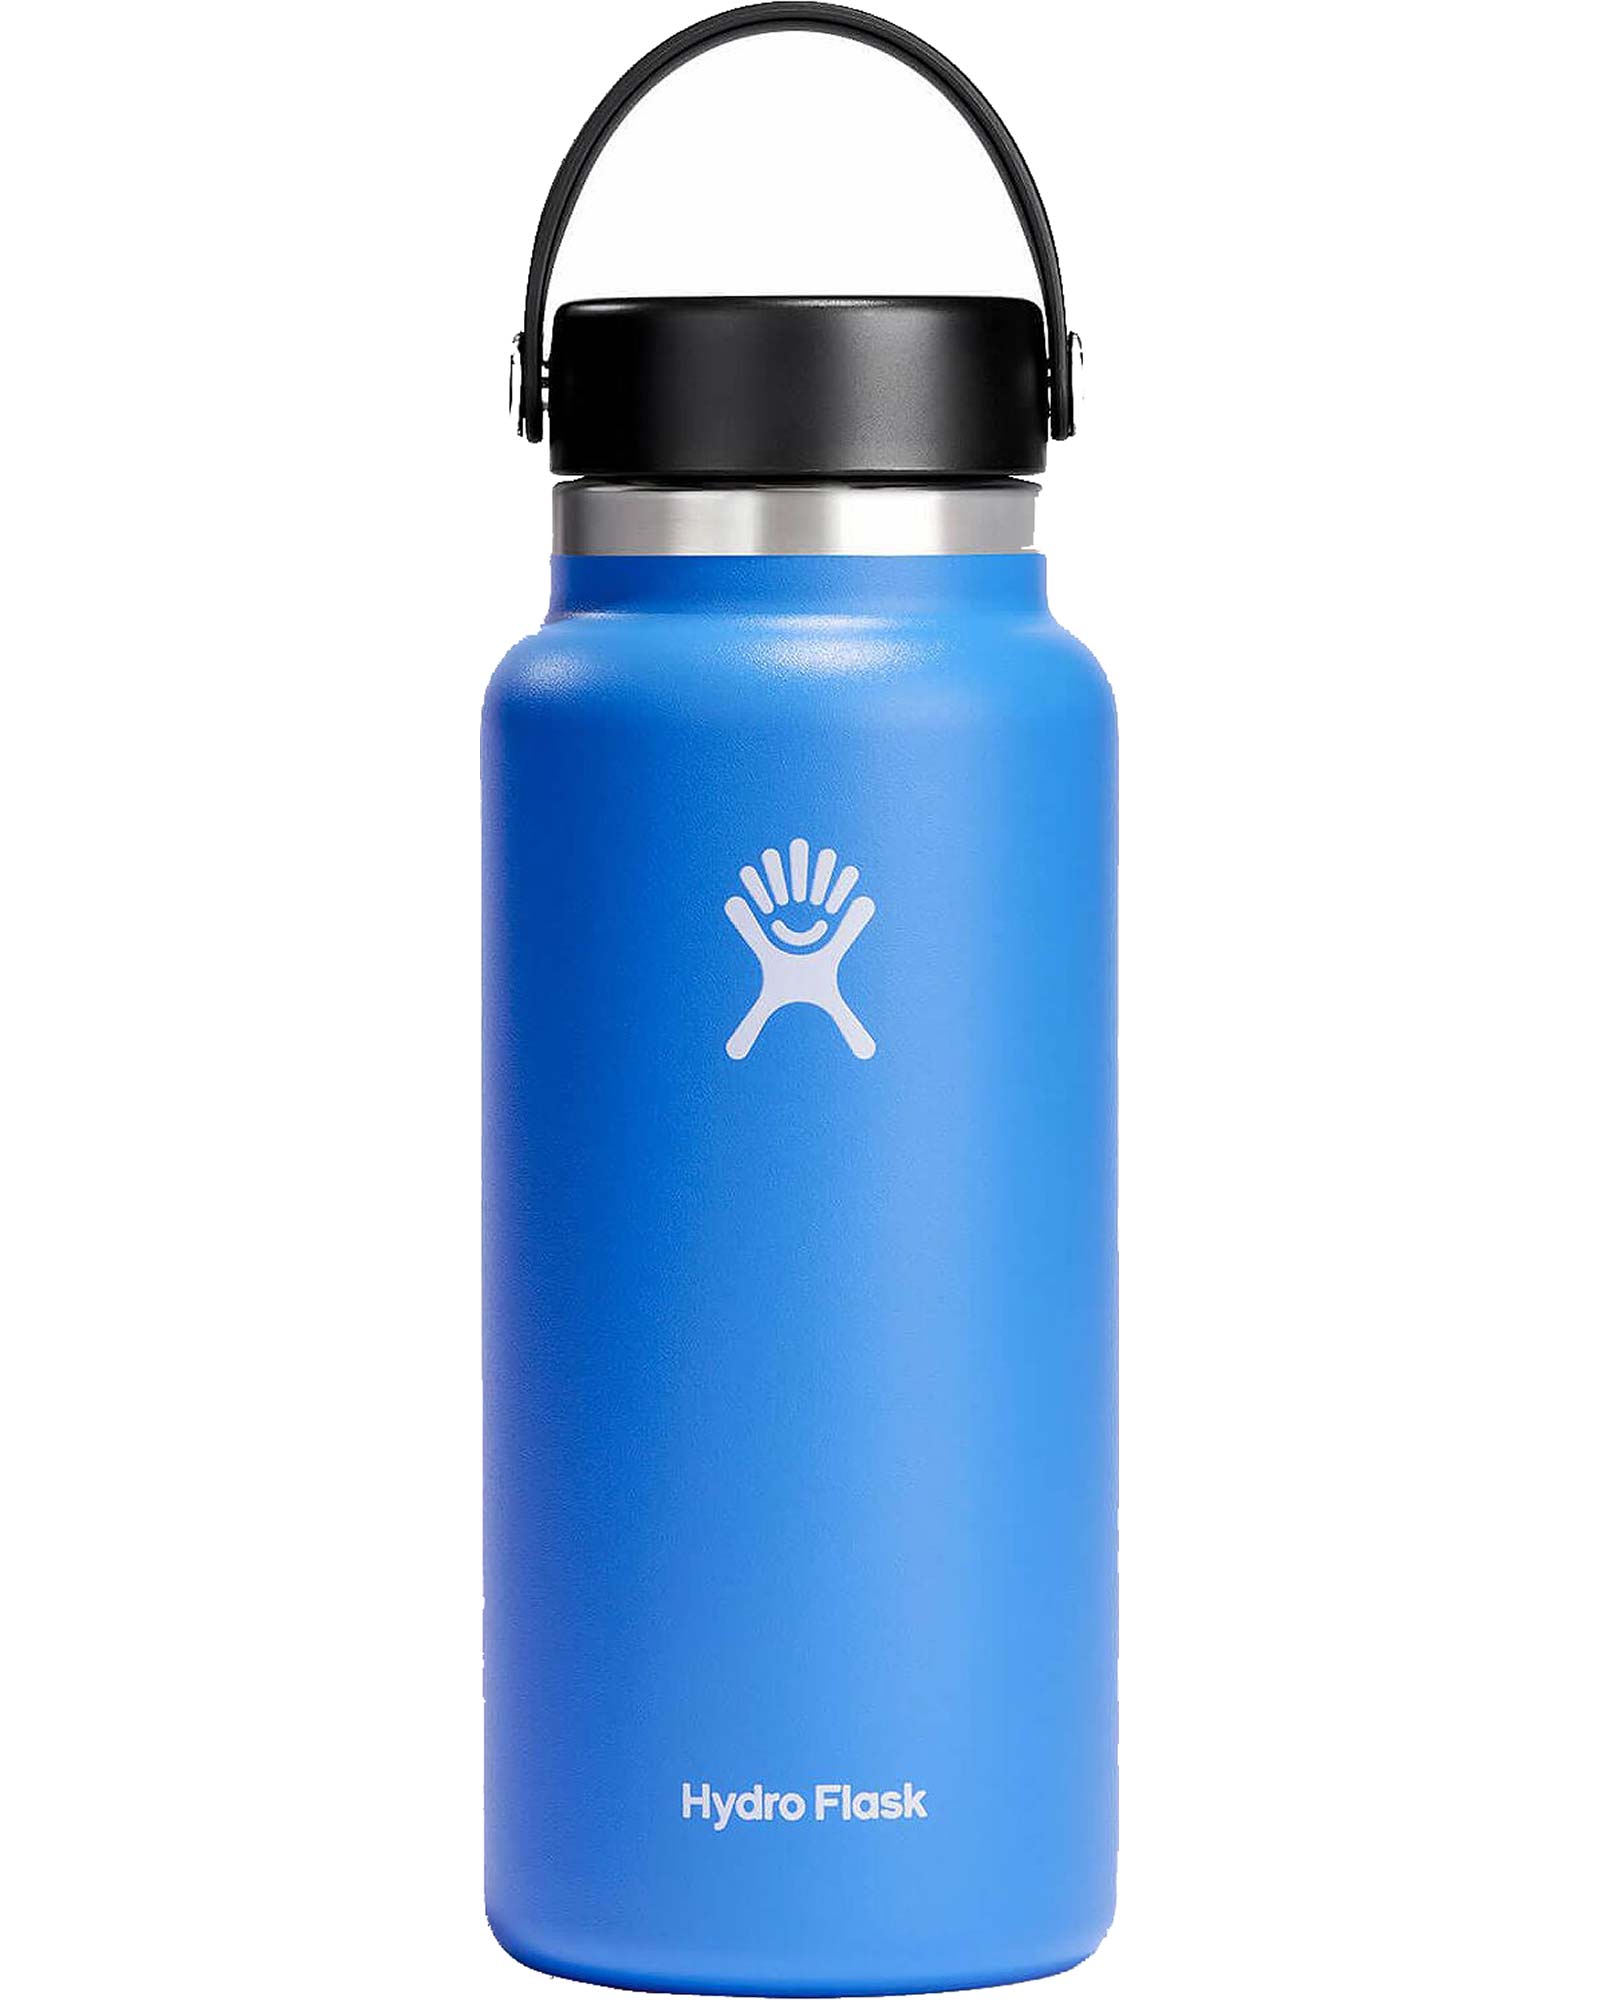 Hydro Flask Wide Mouth 32oz (946ml) 2.0